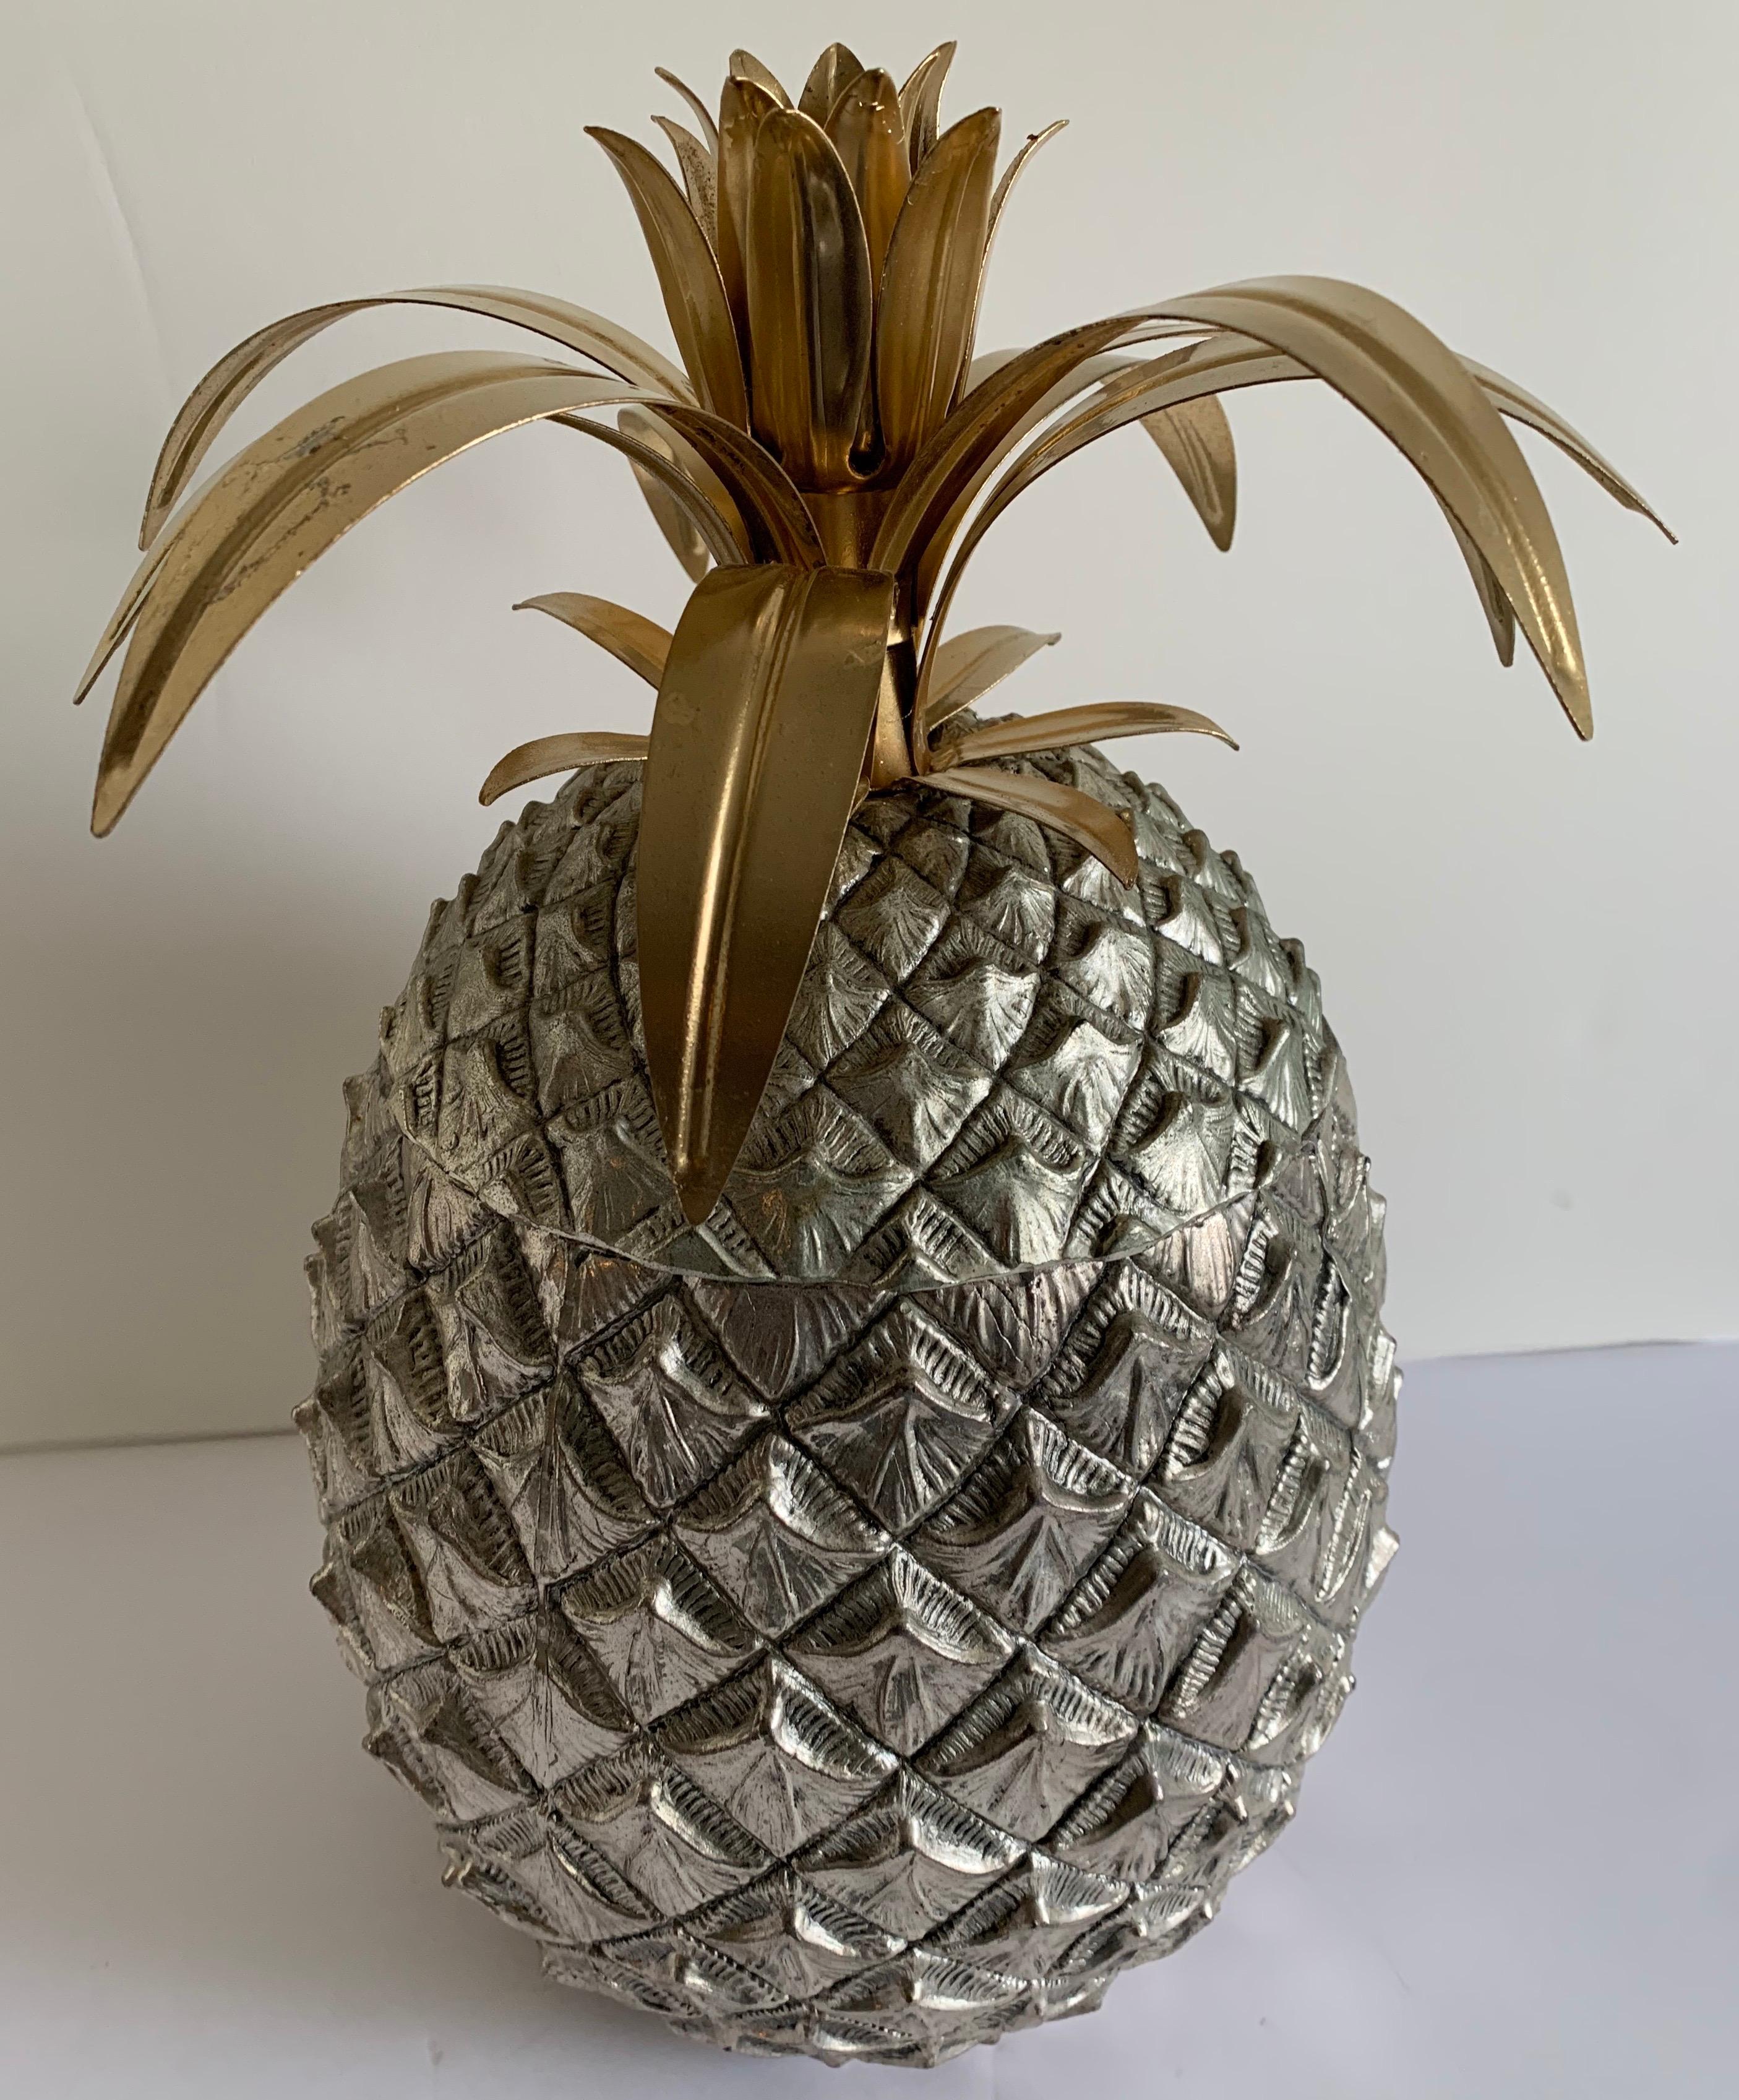 1970s large Mauro Manetti pineapple ice bucket. Hammered silver pineapple with original plastic liner. Brass and gilt metal fronds. Signed on the underside. Made in Italy.